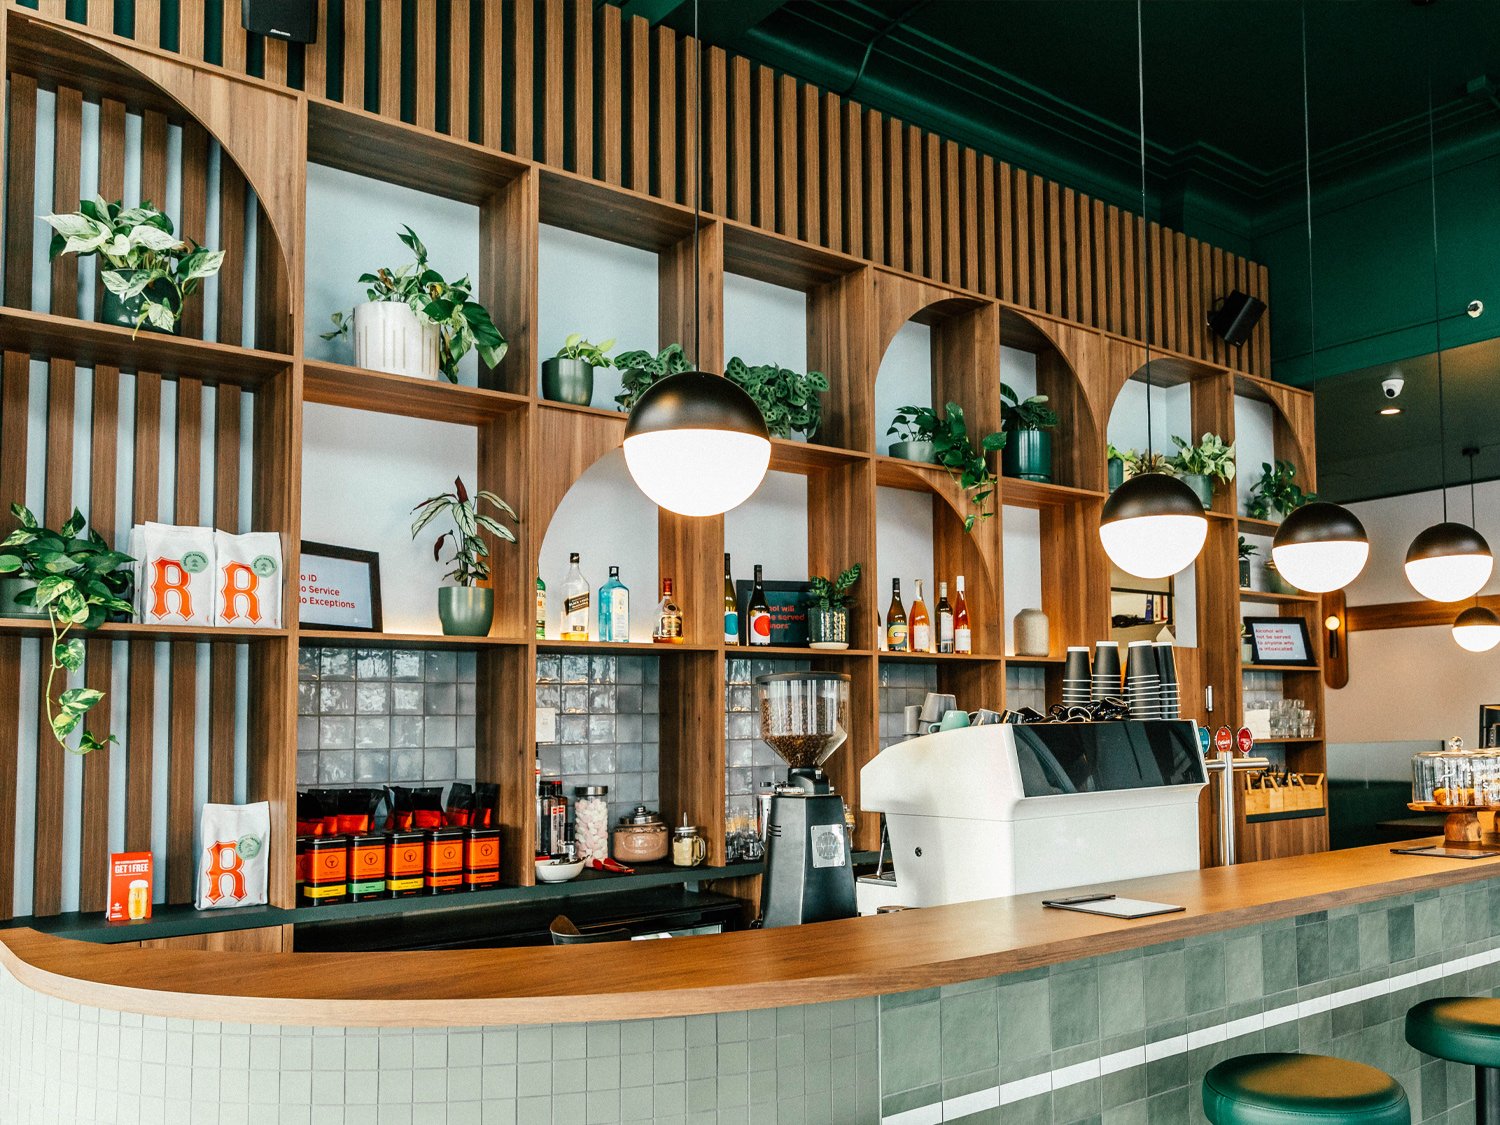 Hood street bistro's wall behind the register, designed beautifully and earthy with wood joinery and heaps of plants